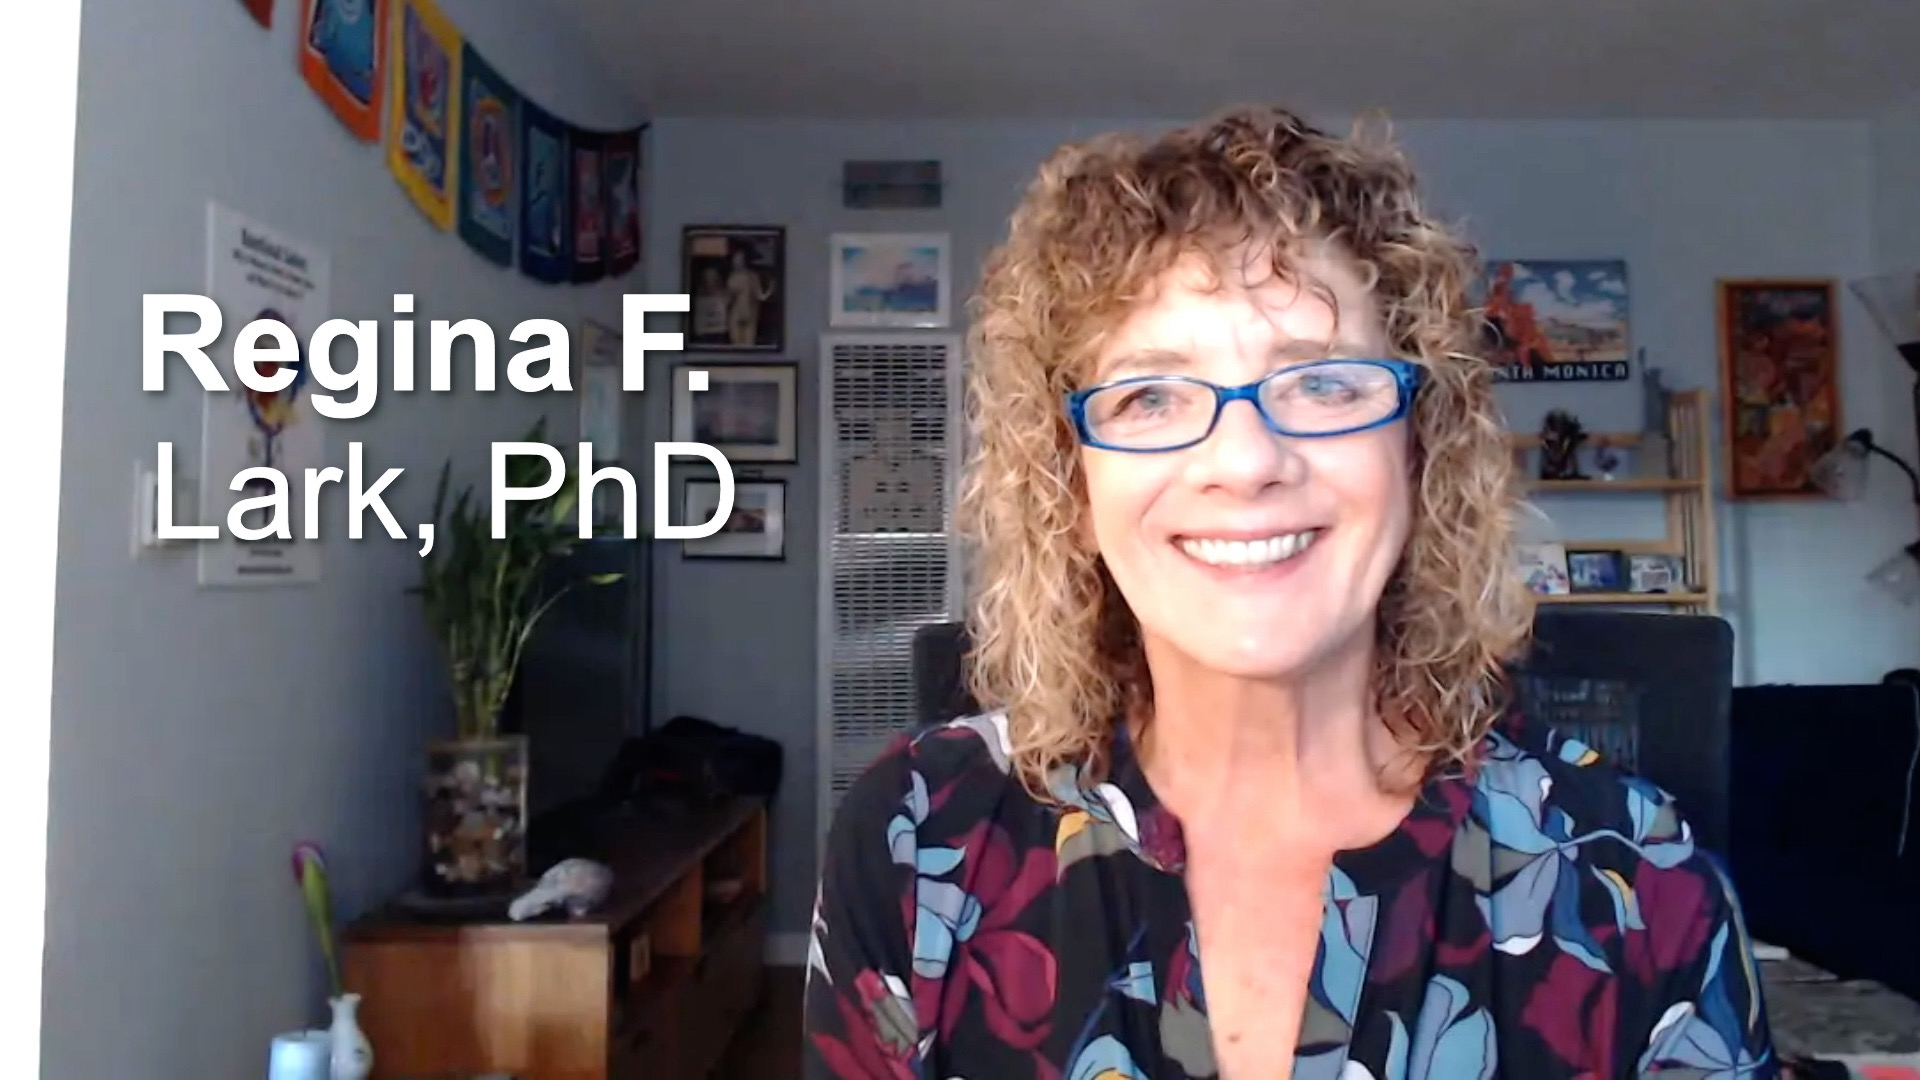 “Ask the Doc” with Regina F. Lark, PhD from A Clear Path, LLC